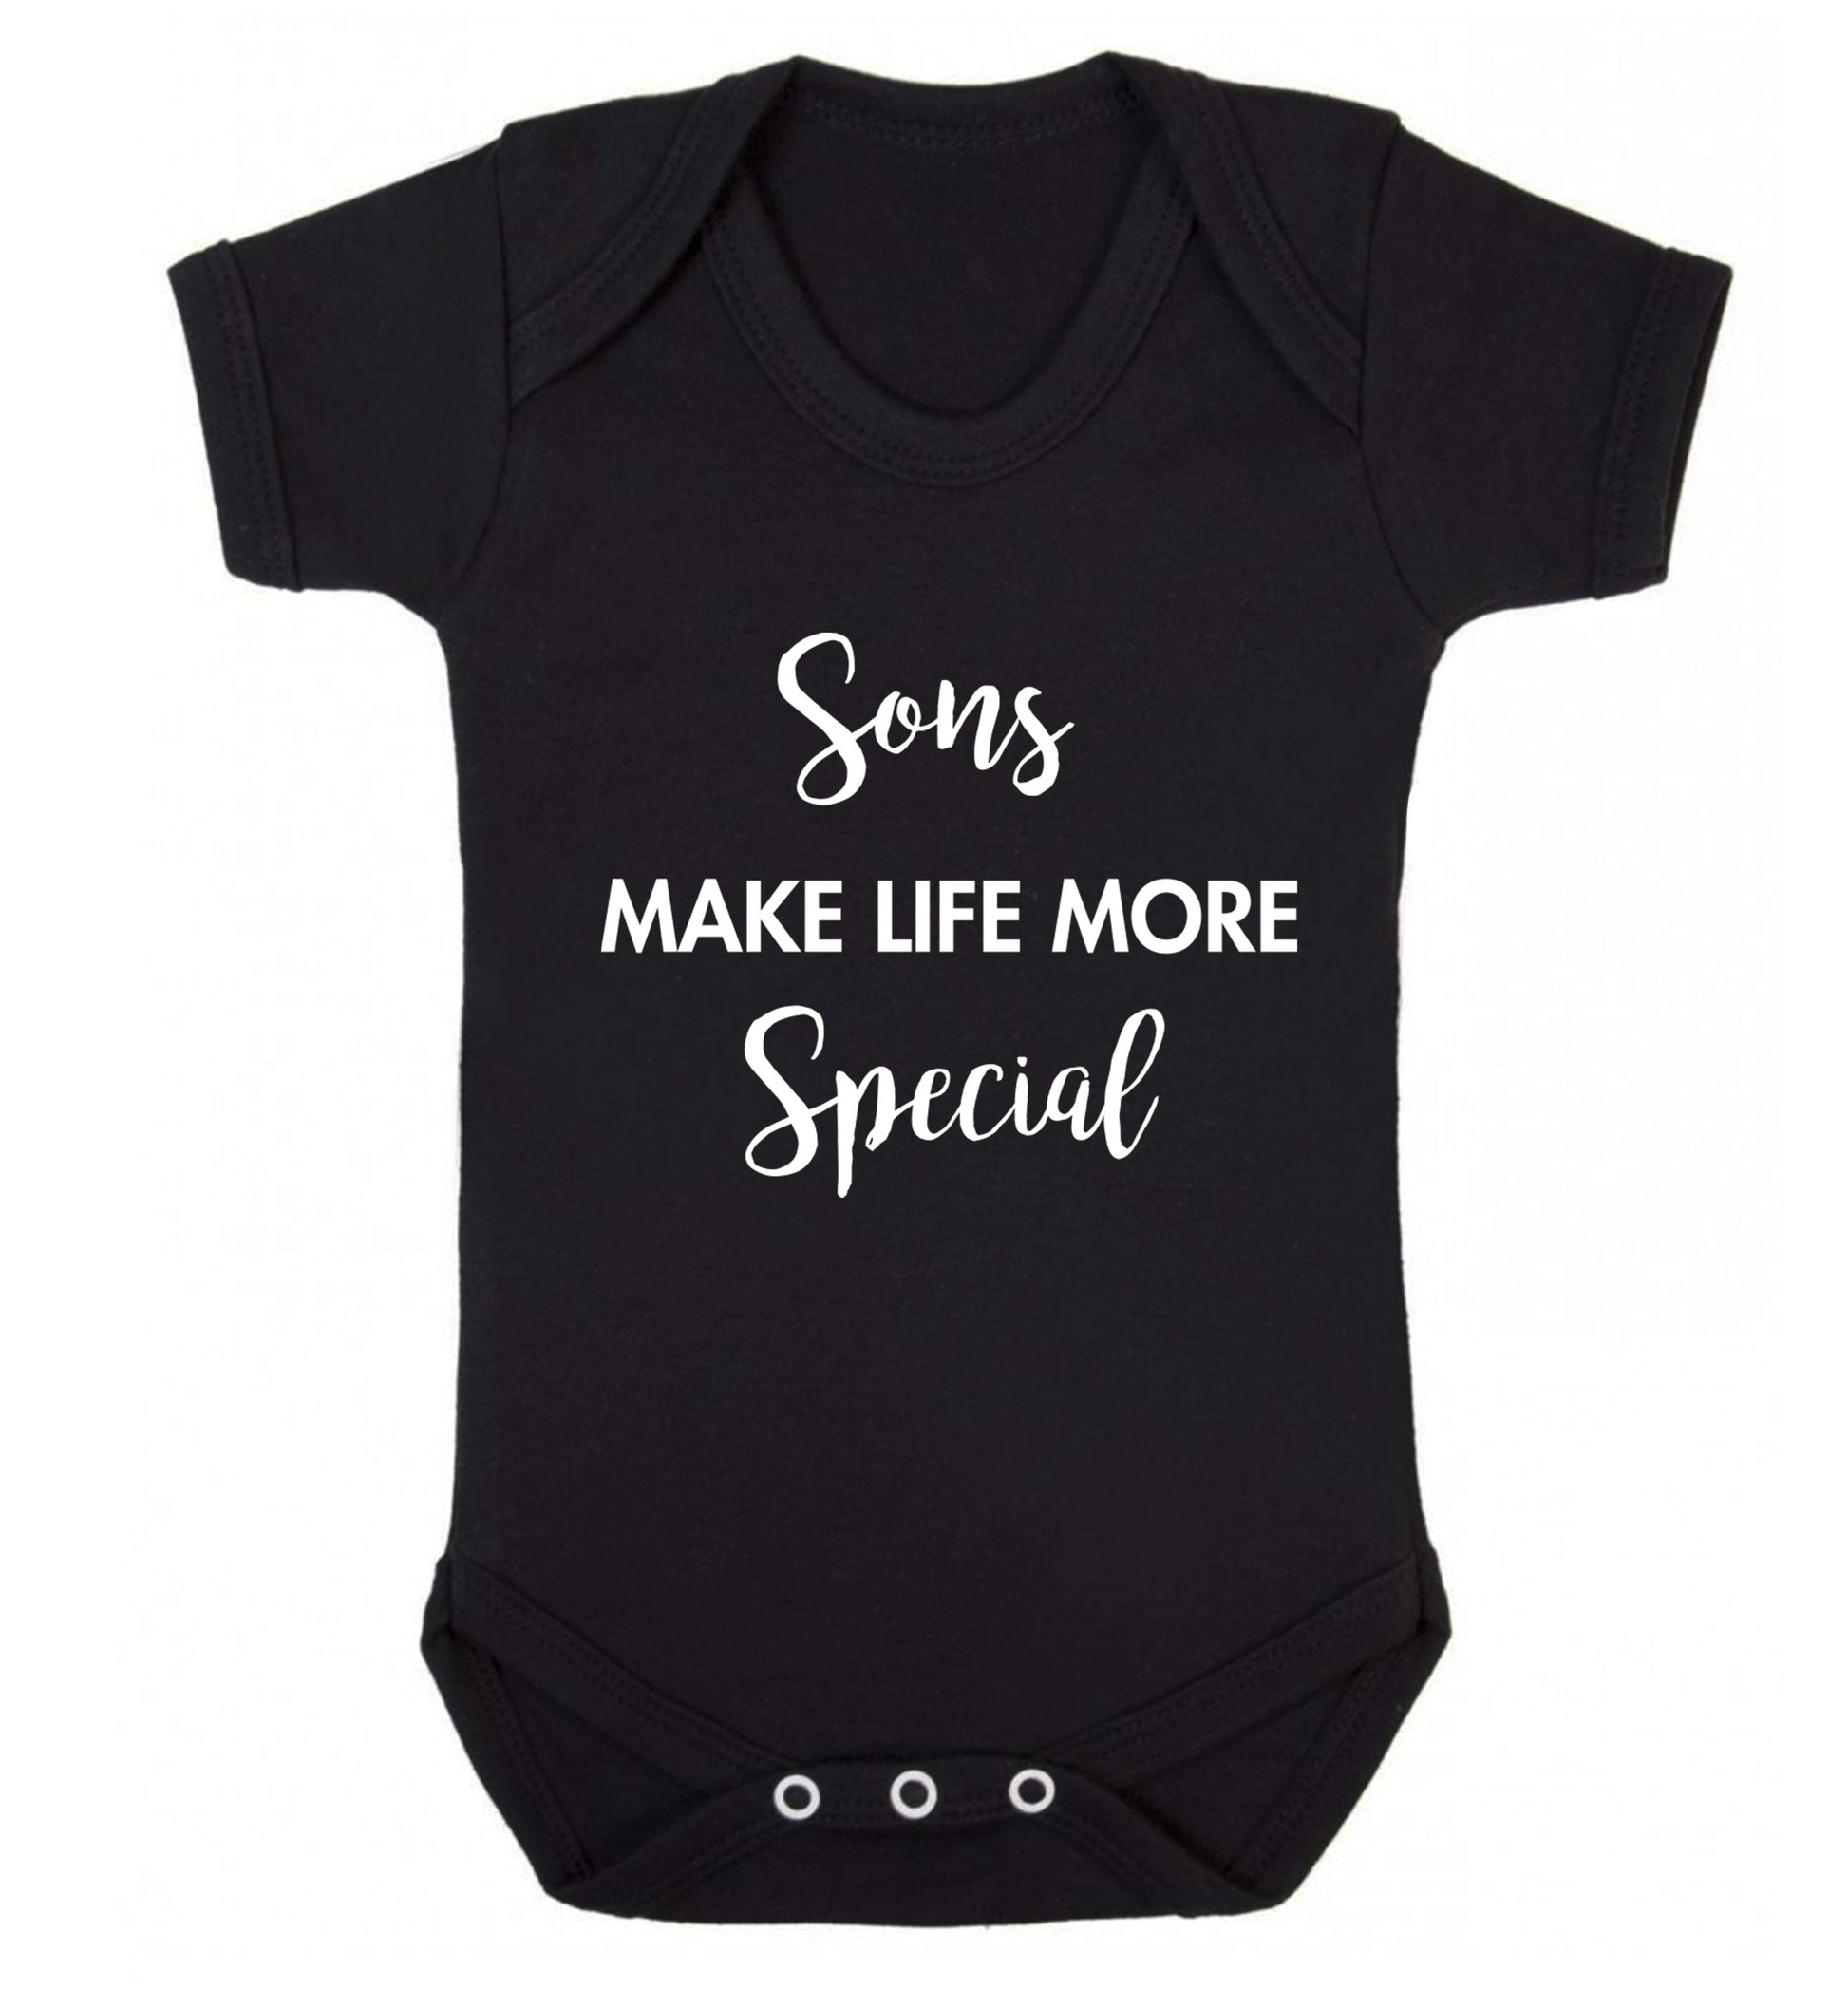 Daughters make life more special Baby Vest black 18-24 months